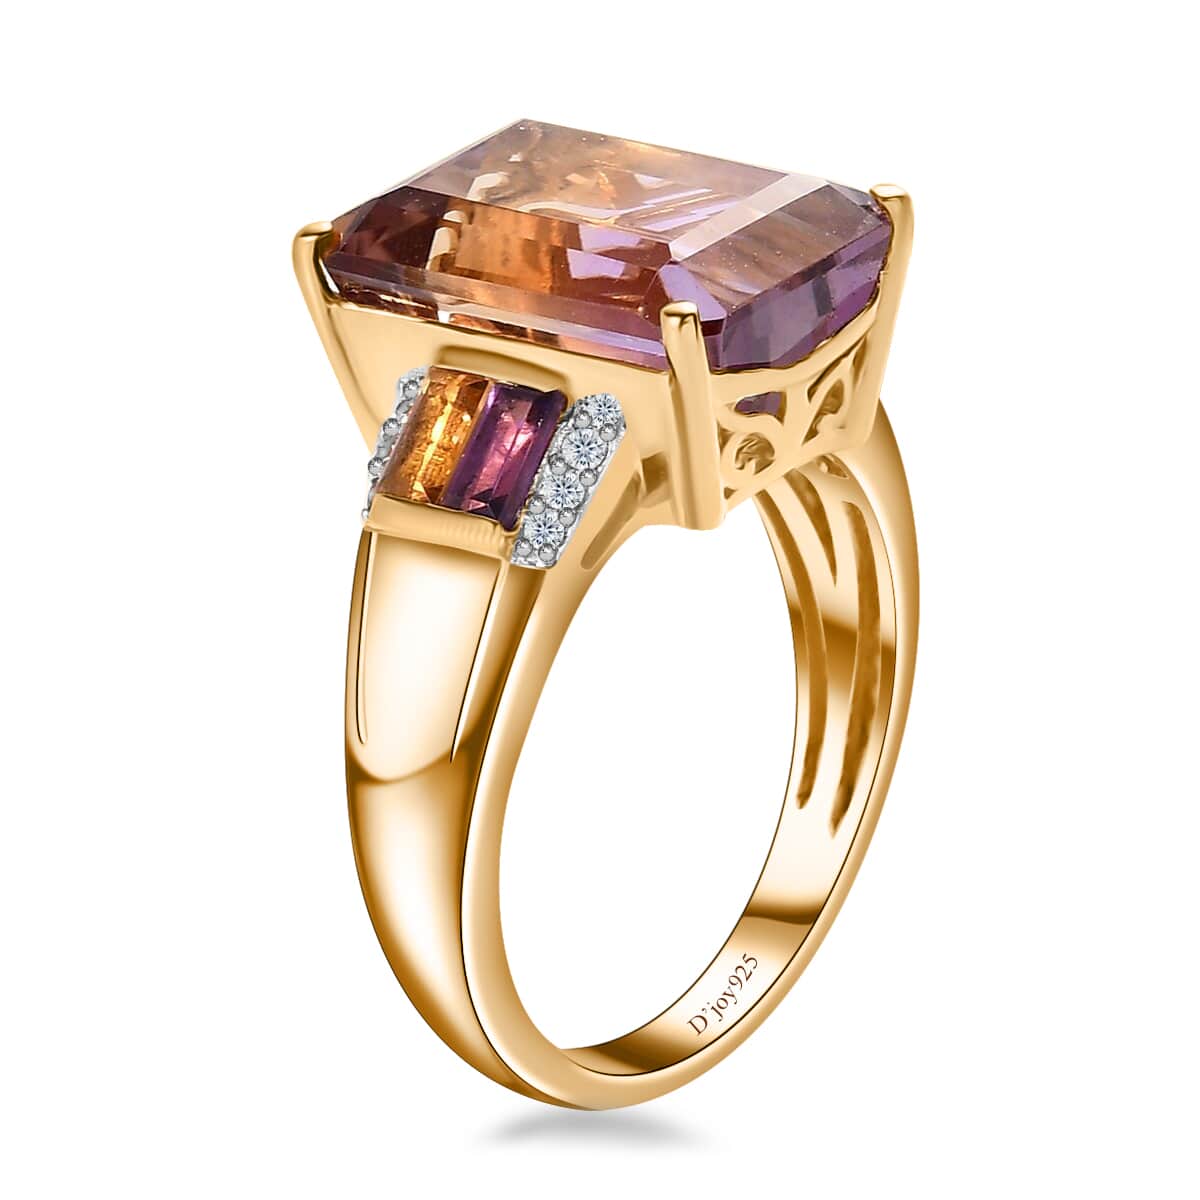 AAA Anahi Ametrine and Multi Gemstone Ring in Vermeil Yellow Gold Over Sterling Silver, Ametrine Jewelry, Birthday Gift For Her 7.25 ctw (Del. 10-15 Days) image number 3